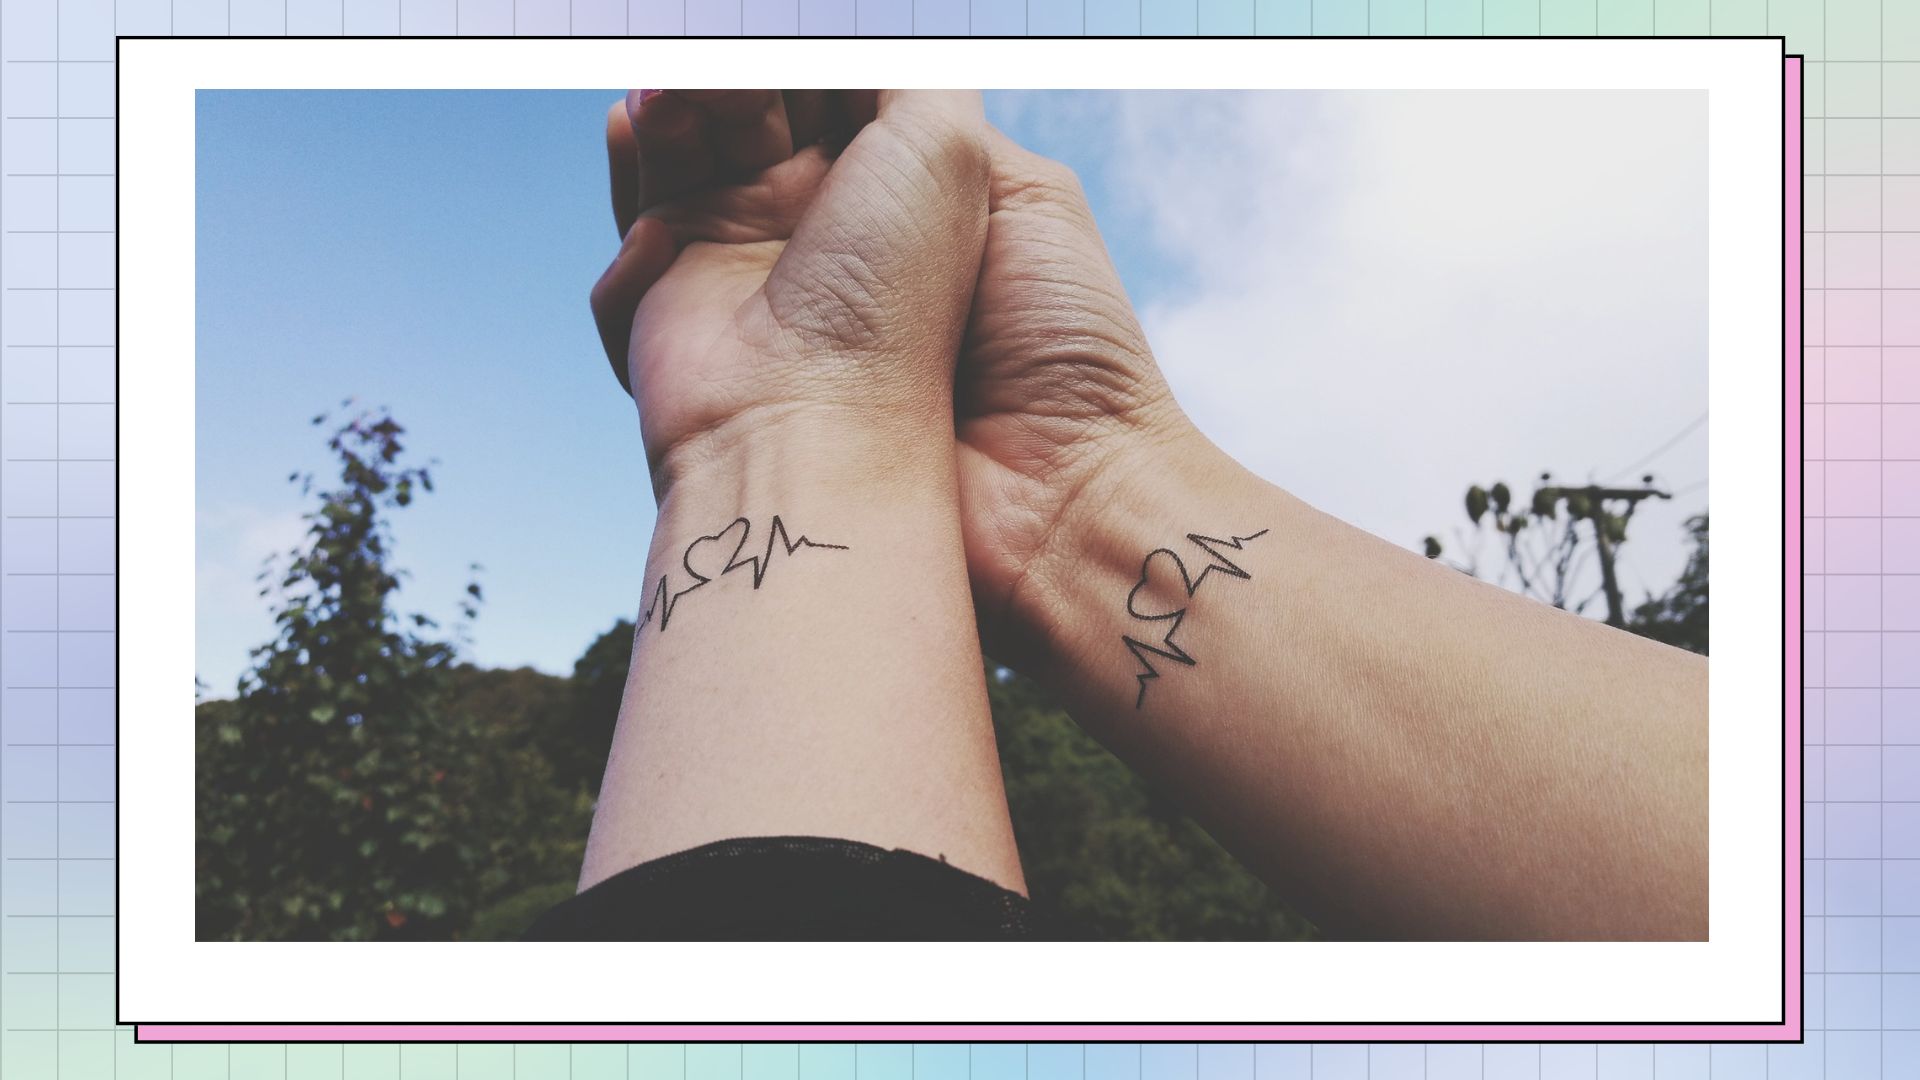 57 Inspiring Mental Health Tattoos With Meaning - Our Mindful Life